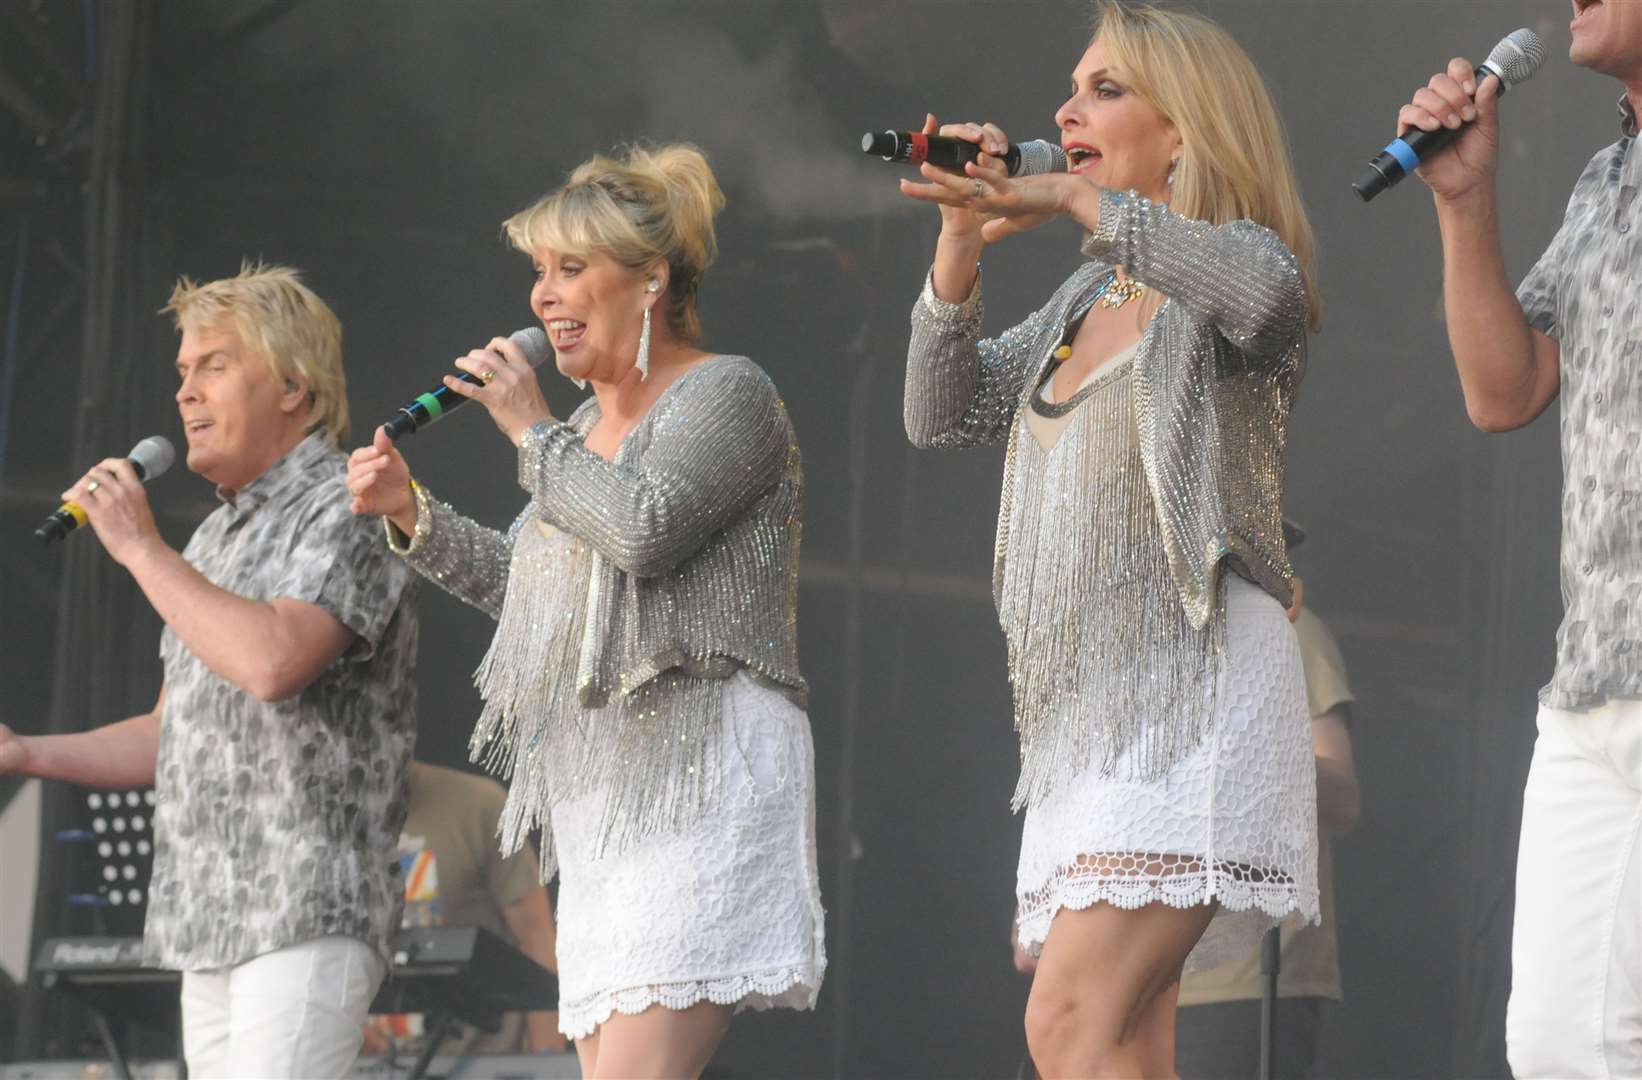 The Fizz performing at Rochester Castle Gardens in 2015 - Mike Nolan far left. Picture: Steve Crispe